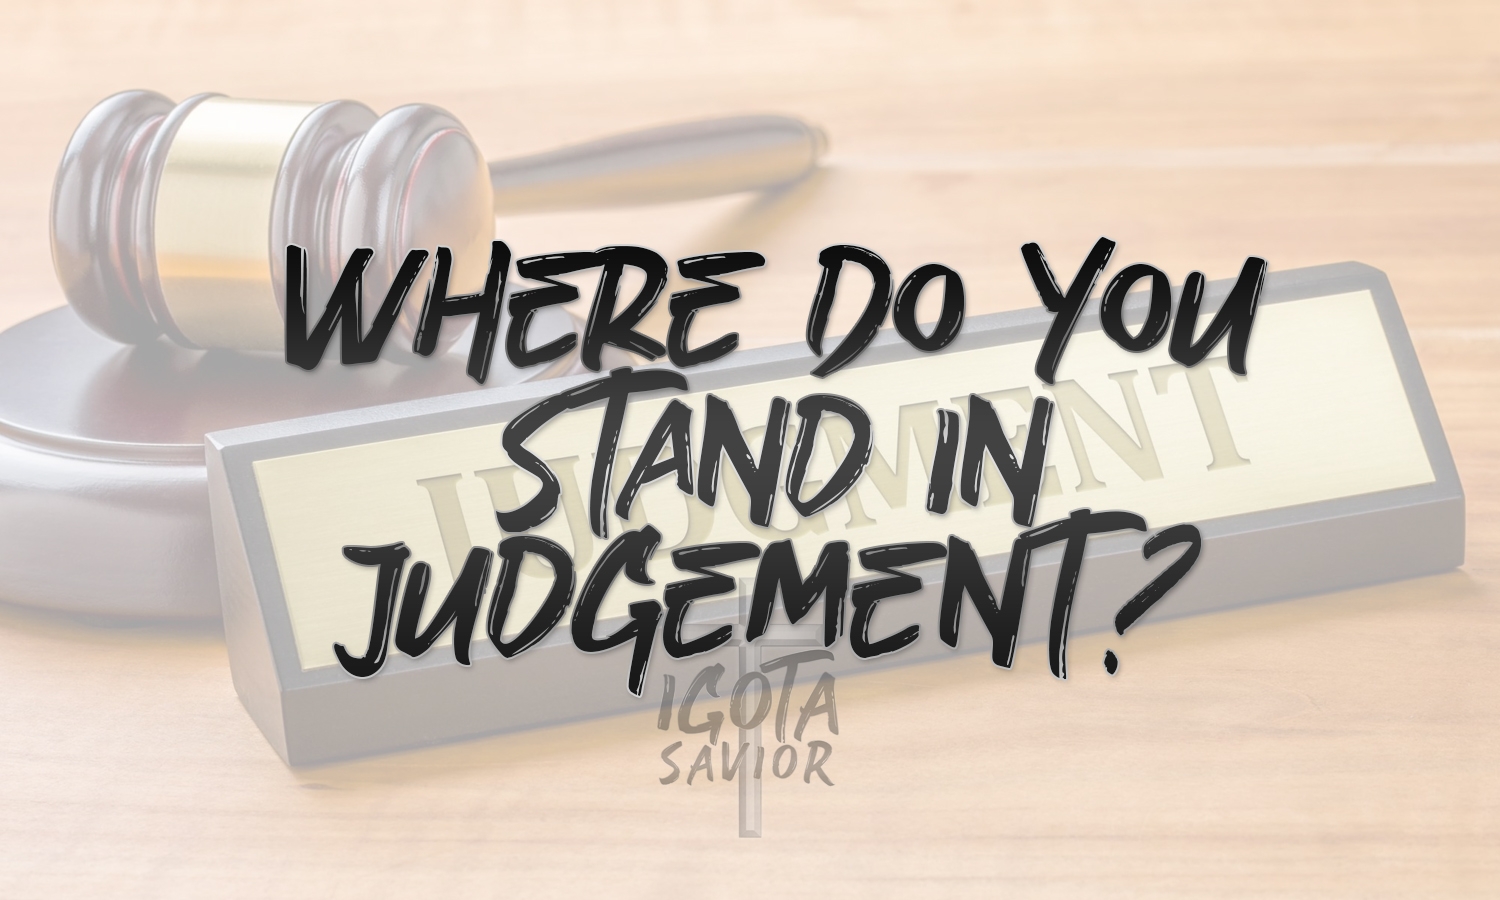 Where Do You Stand In Judgement?